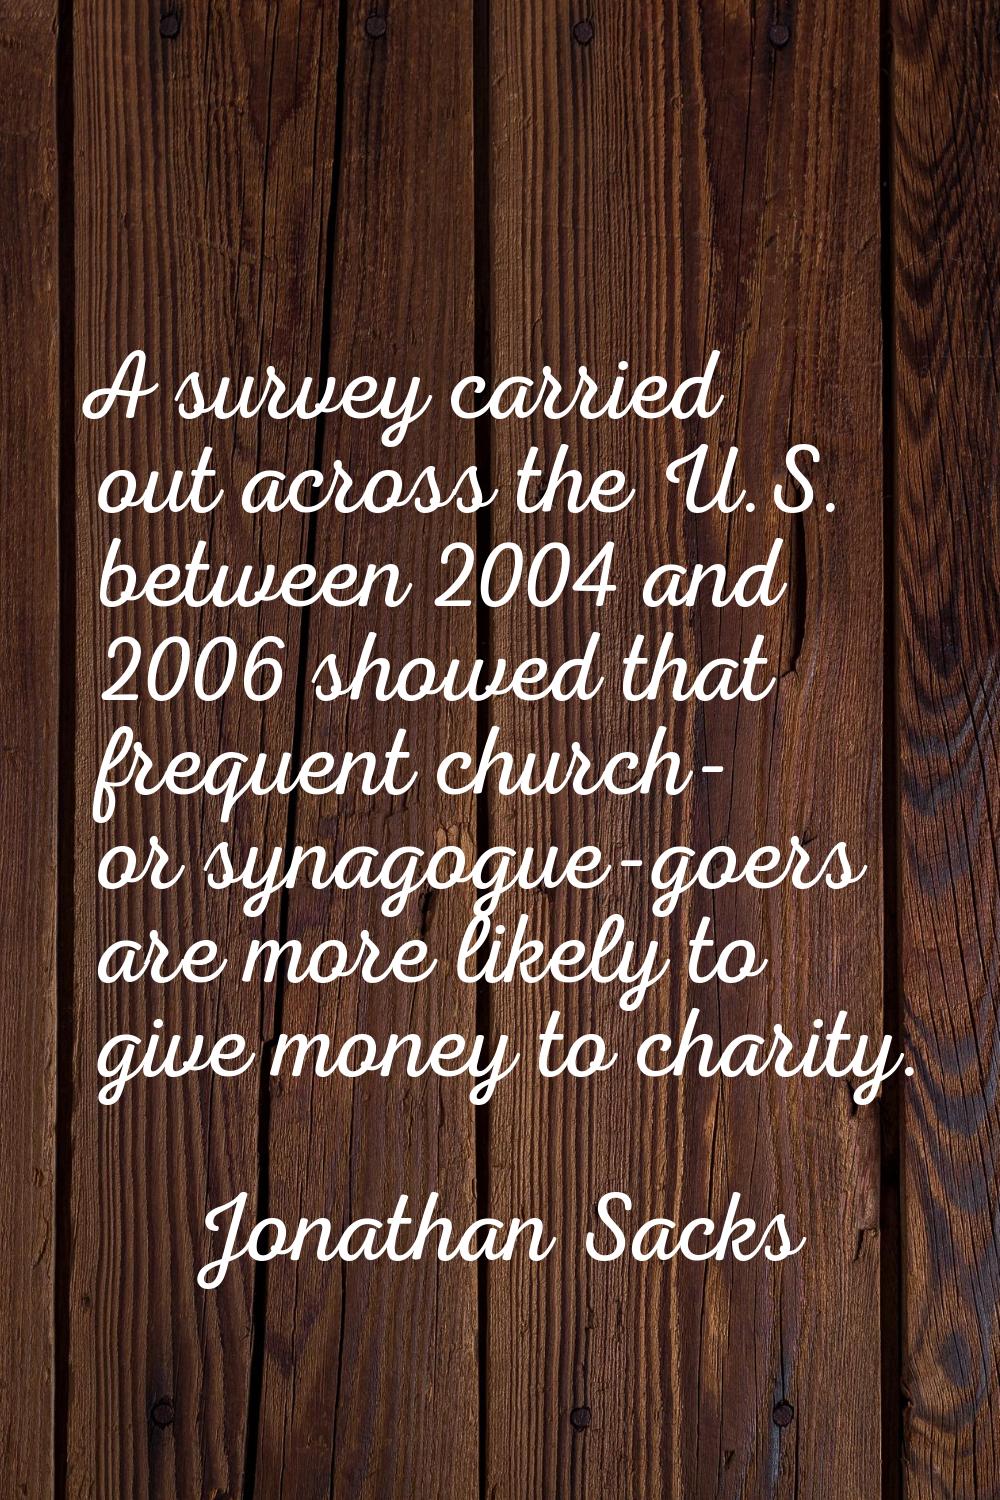 A survey carried out across the U.S. between 2004 and 2006 showed that frequent church- or synagogu